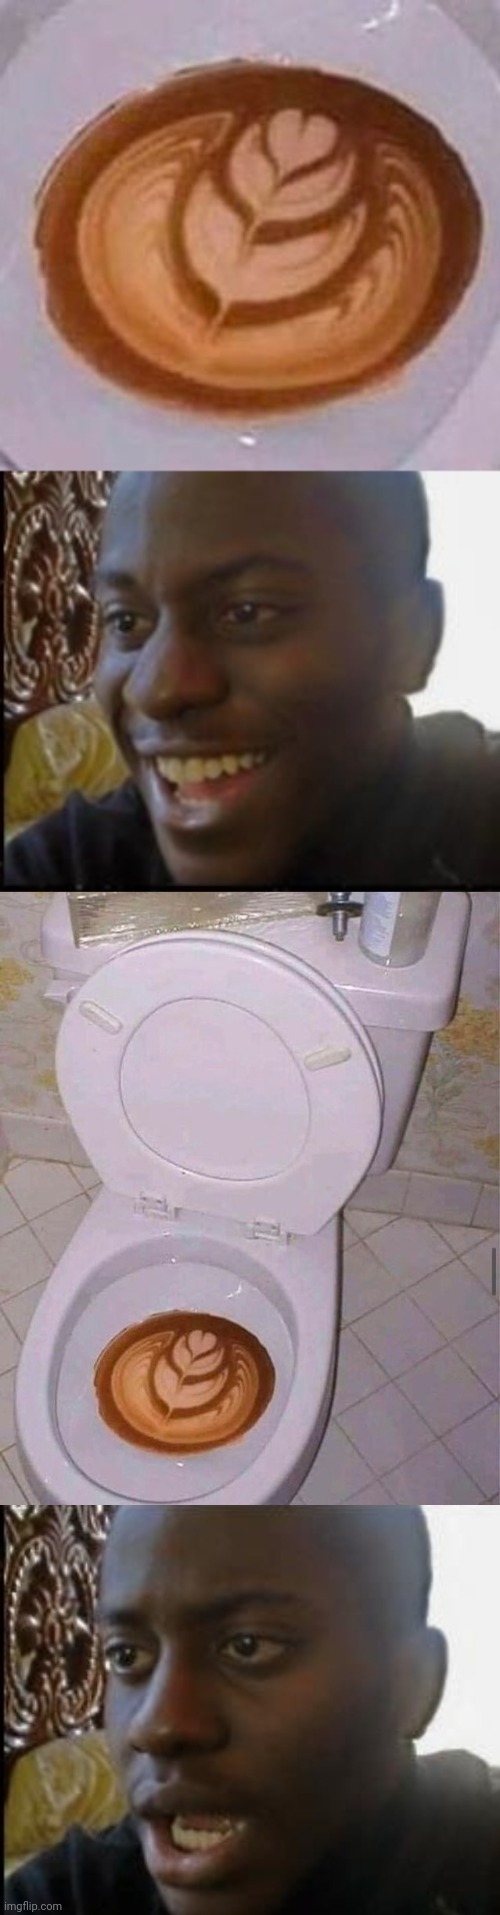 I DON'T WANNA KNOW HOW THAT WAS MADE | image tagged in disappointed black guy,toilet,toilet humor,wtf,latte,coffee | made w/ Imgflip meme maker